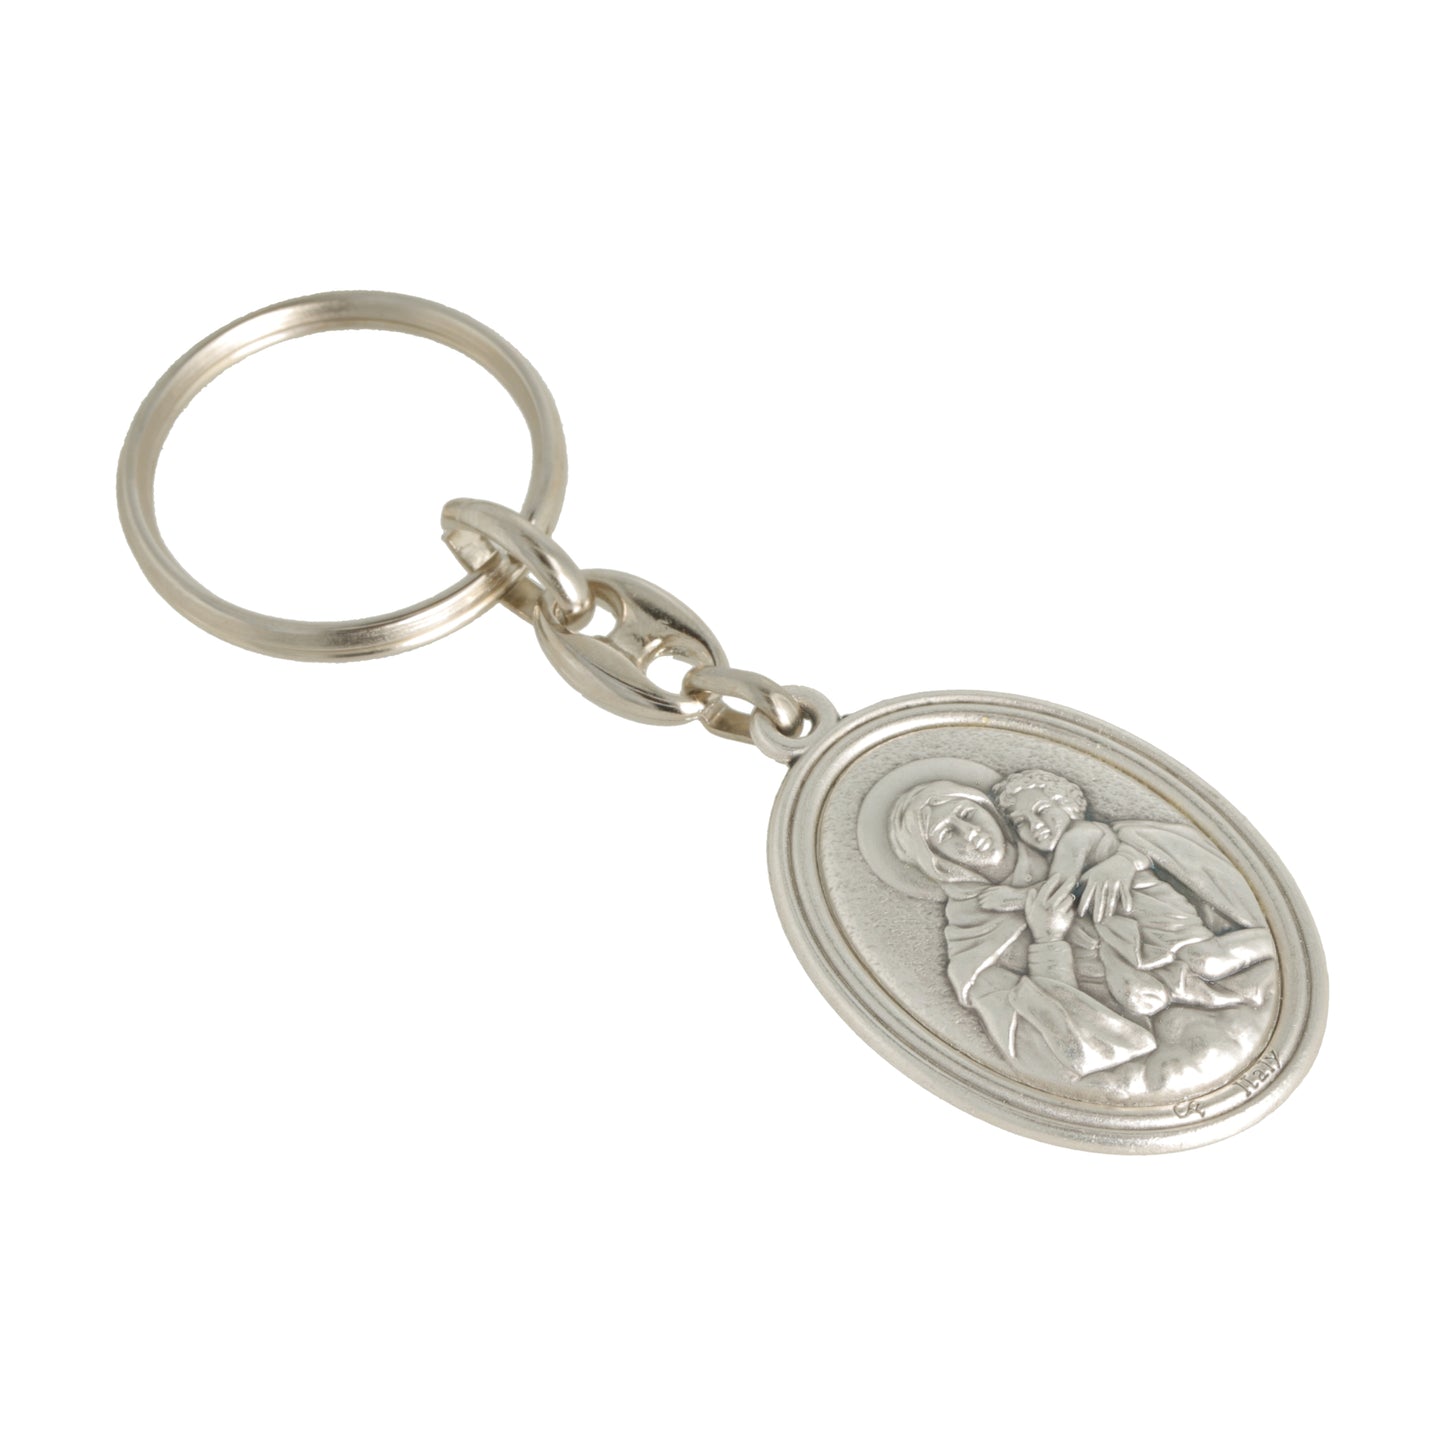 Keychain Schoenstatt Holy Family Silver Oval. Souvenirs from Italy